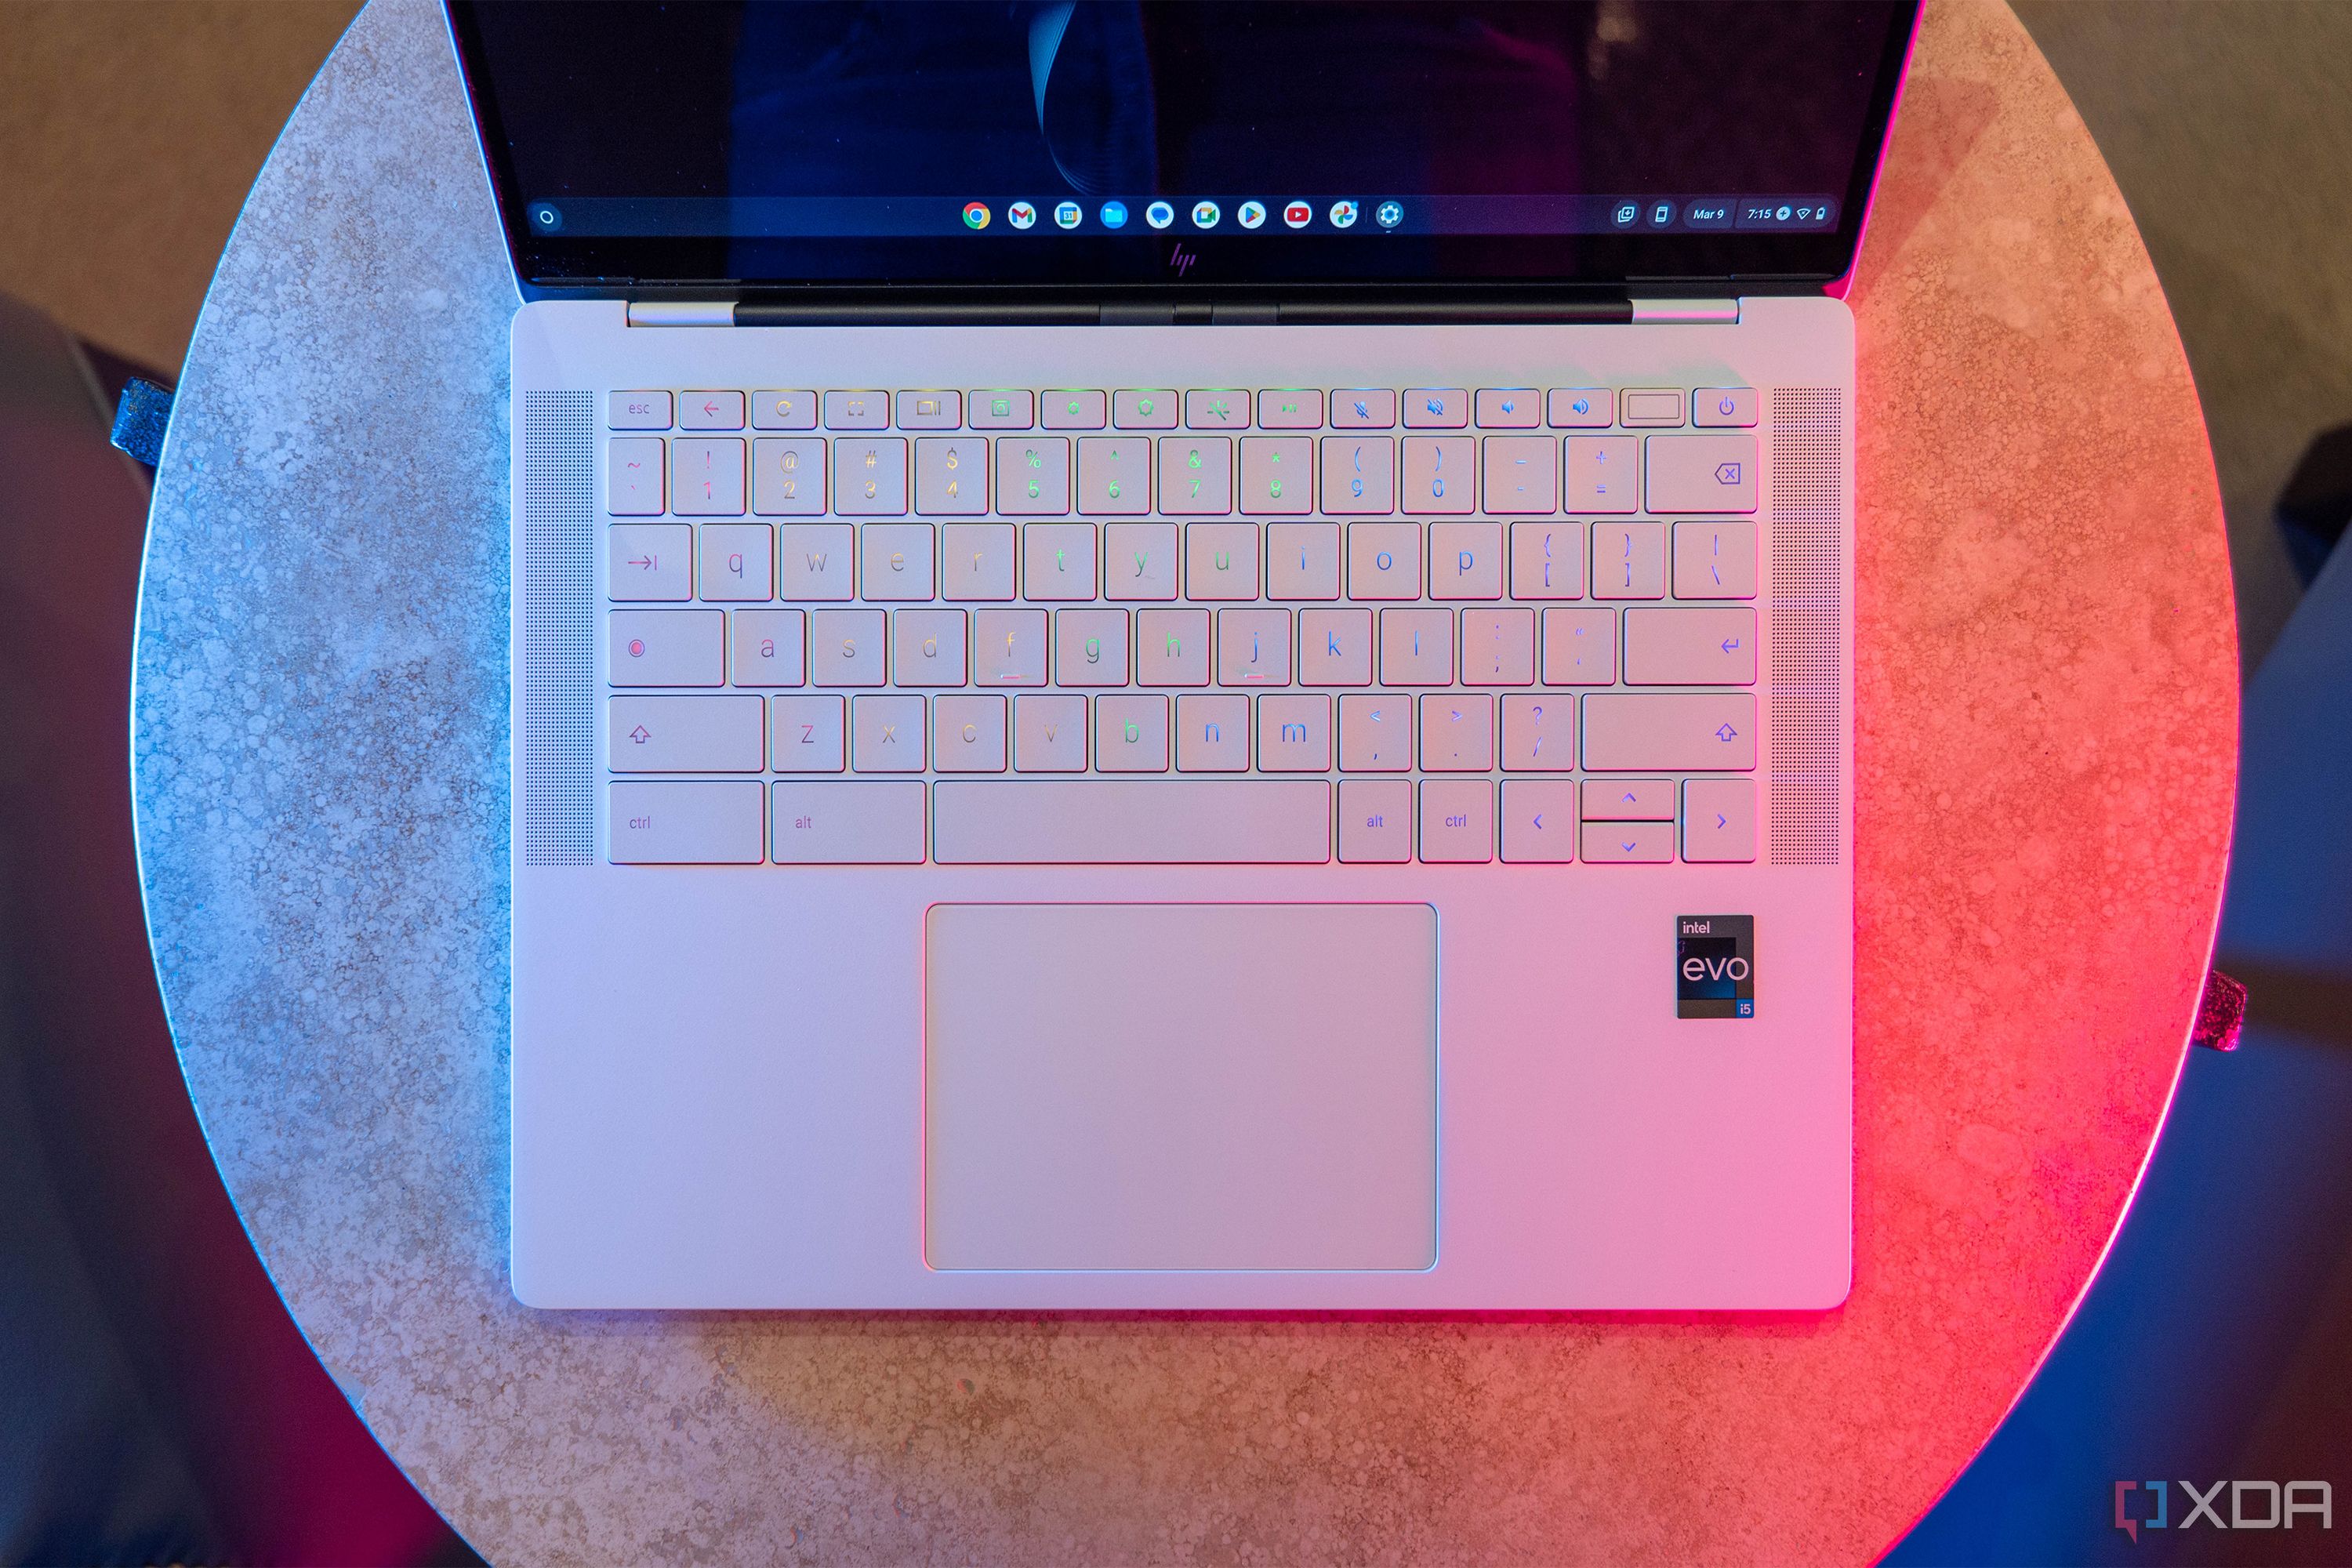 How to set up an RGB keyboard on a Chromebook